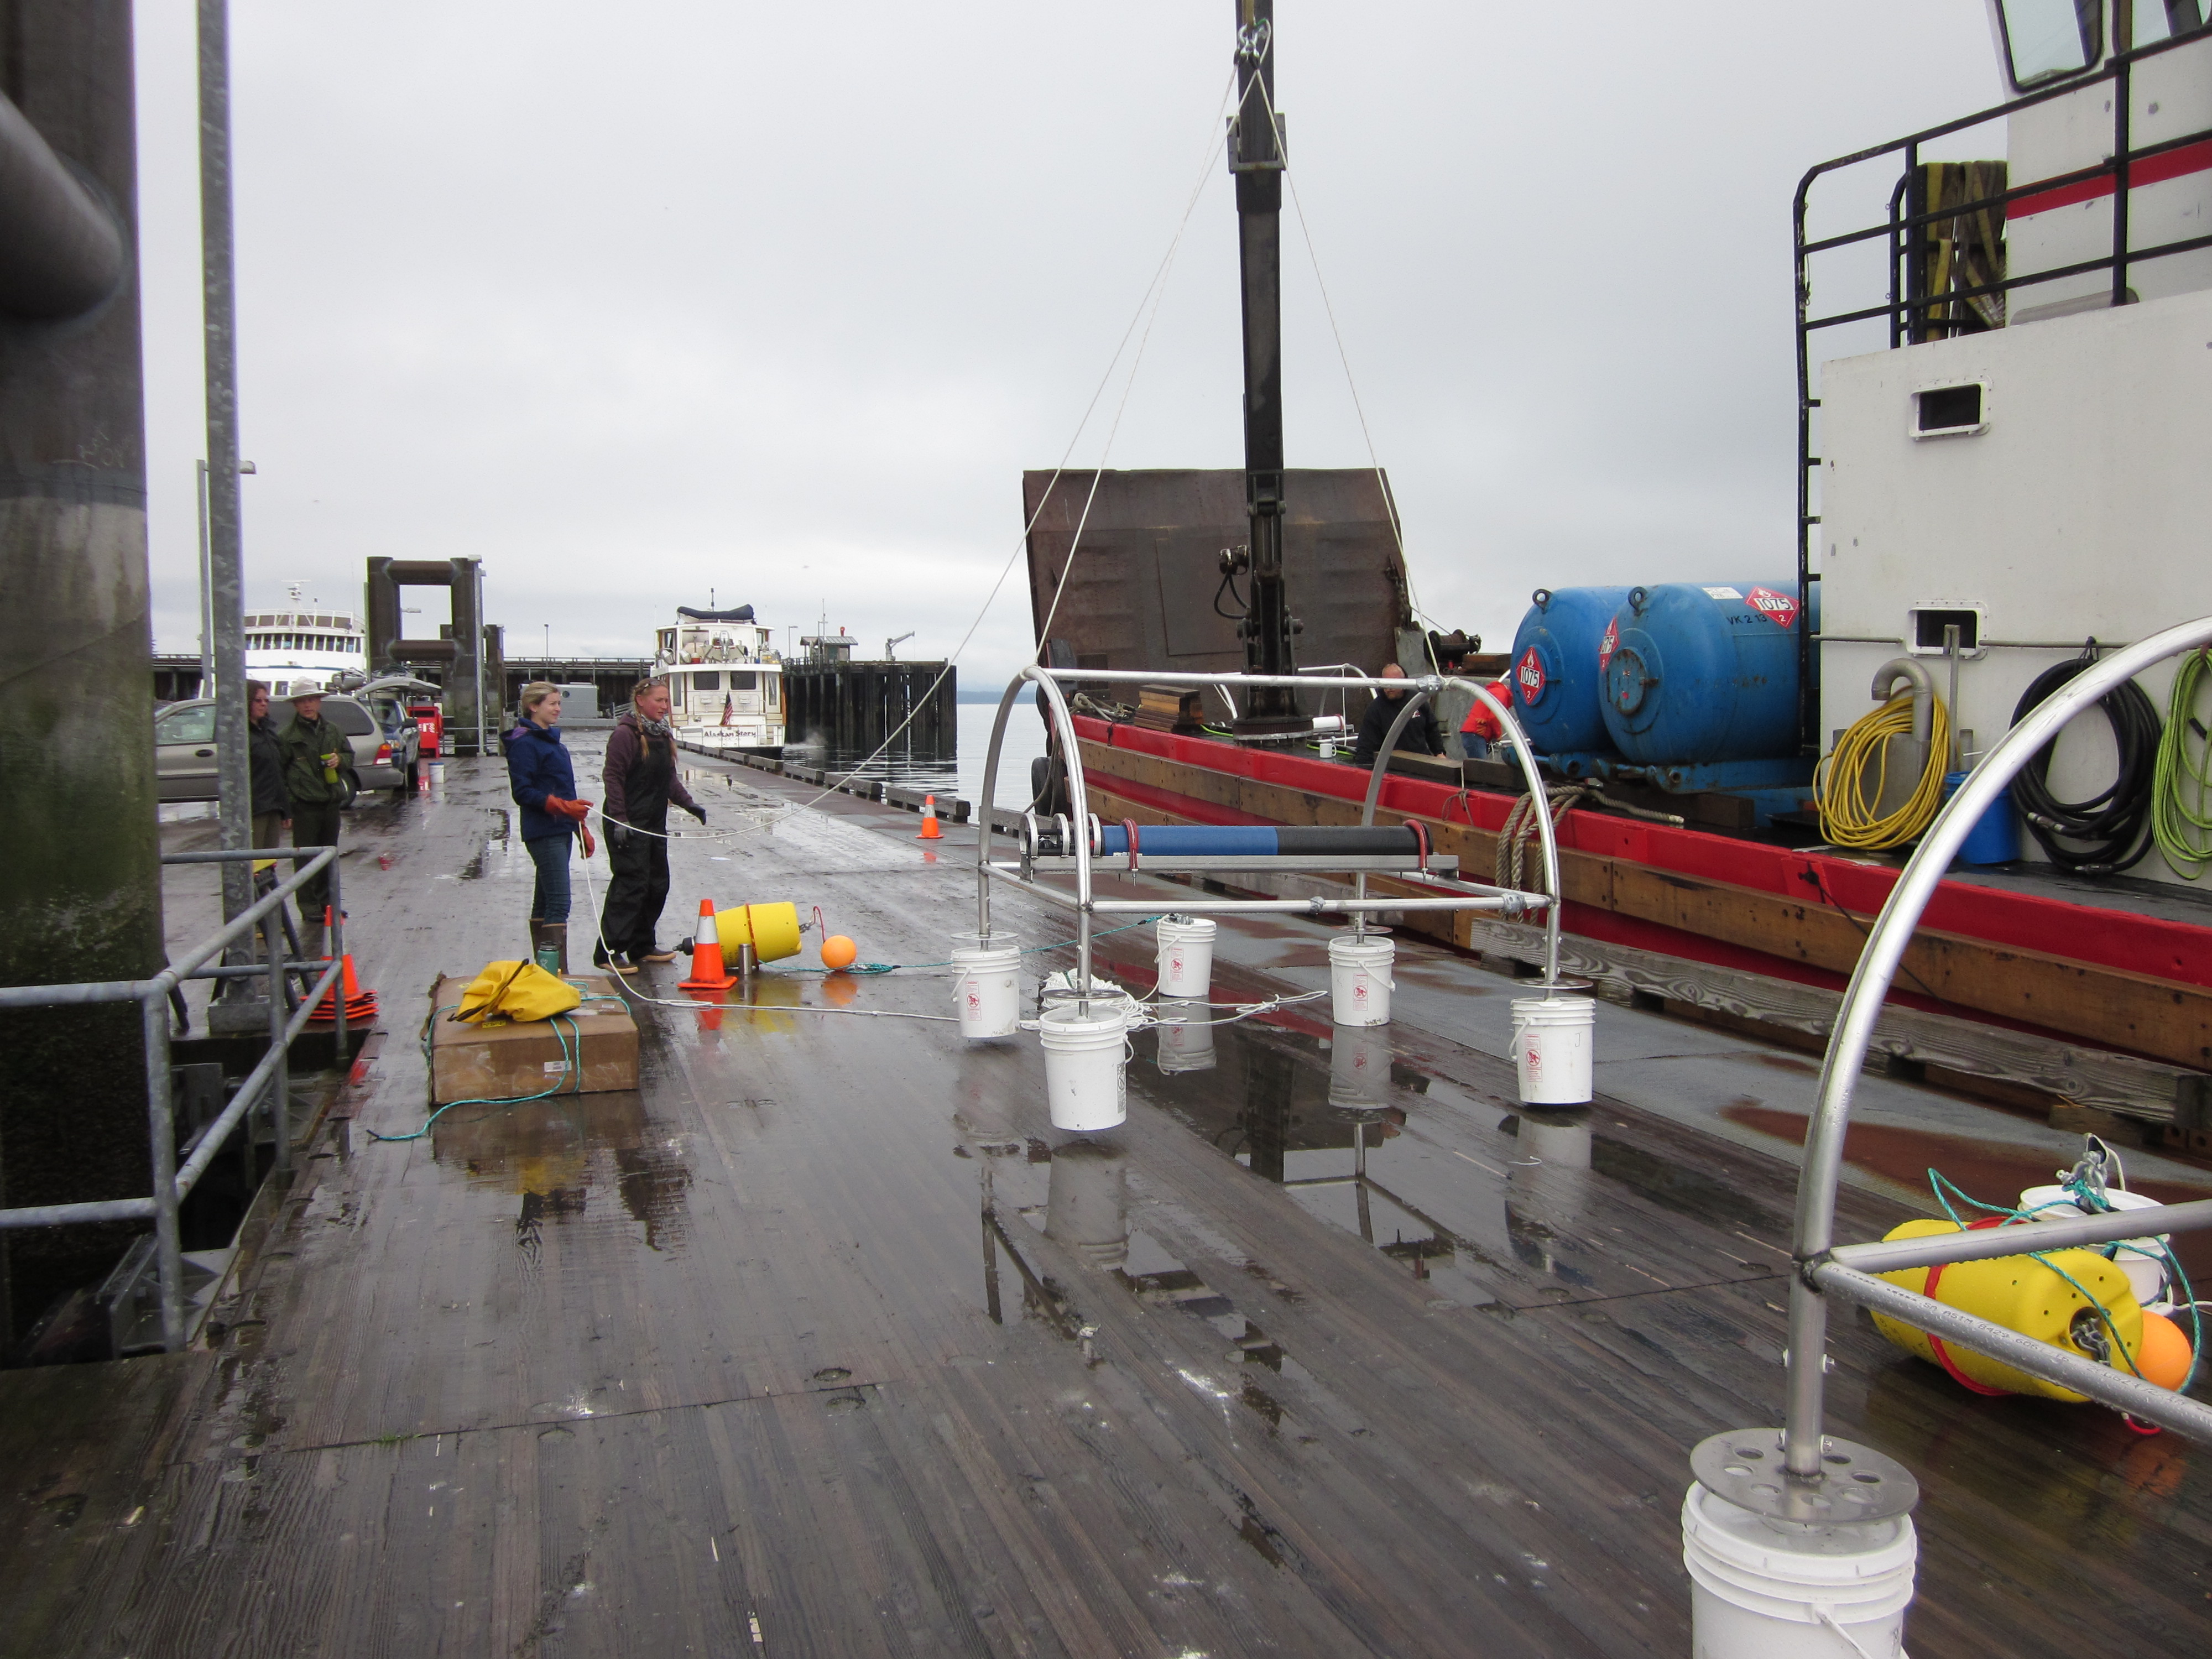 Hydrophone being loaded onto a ship